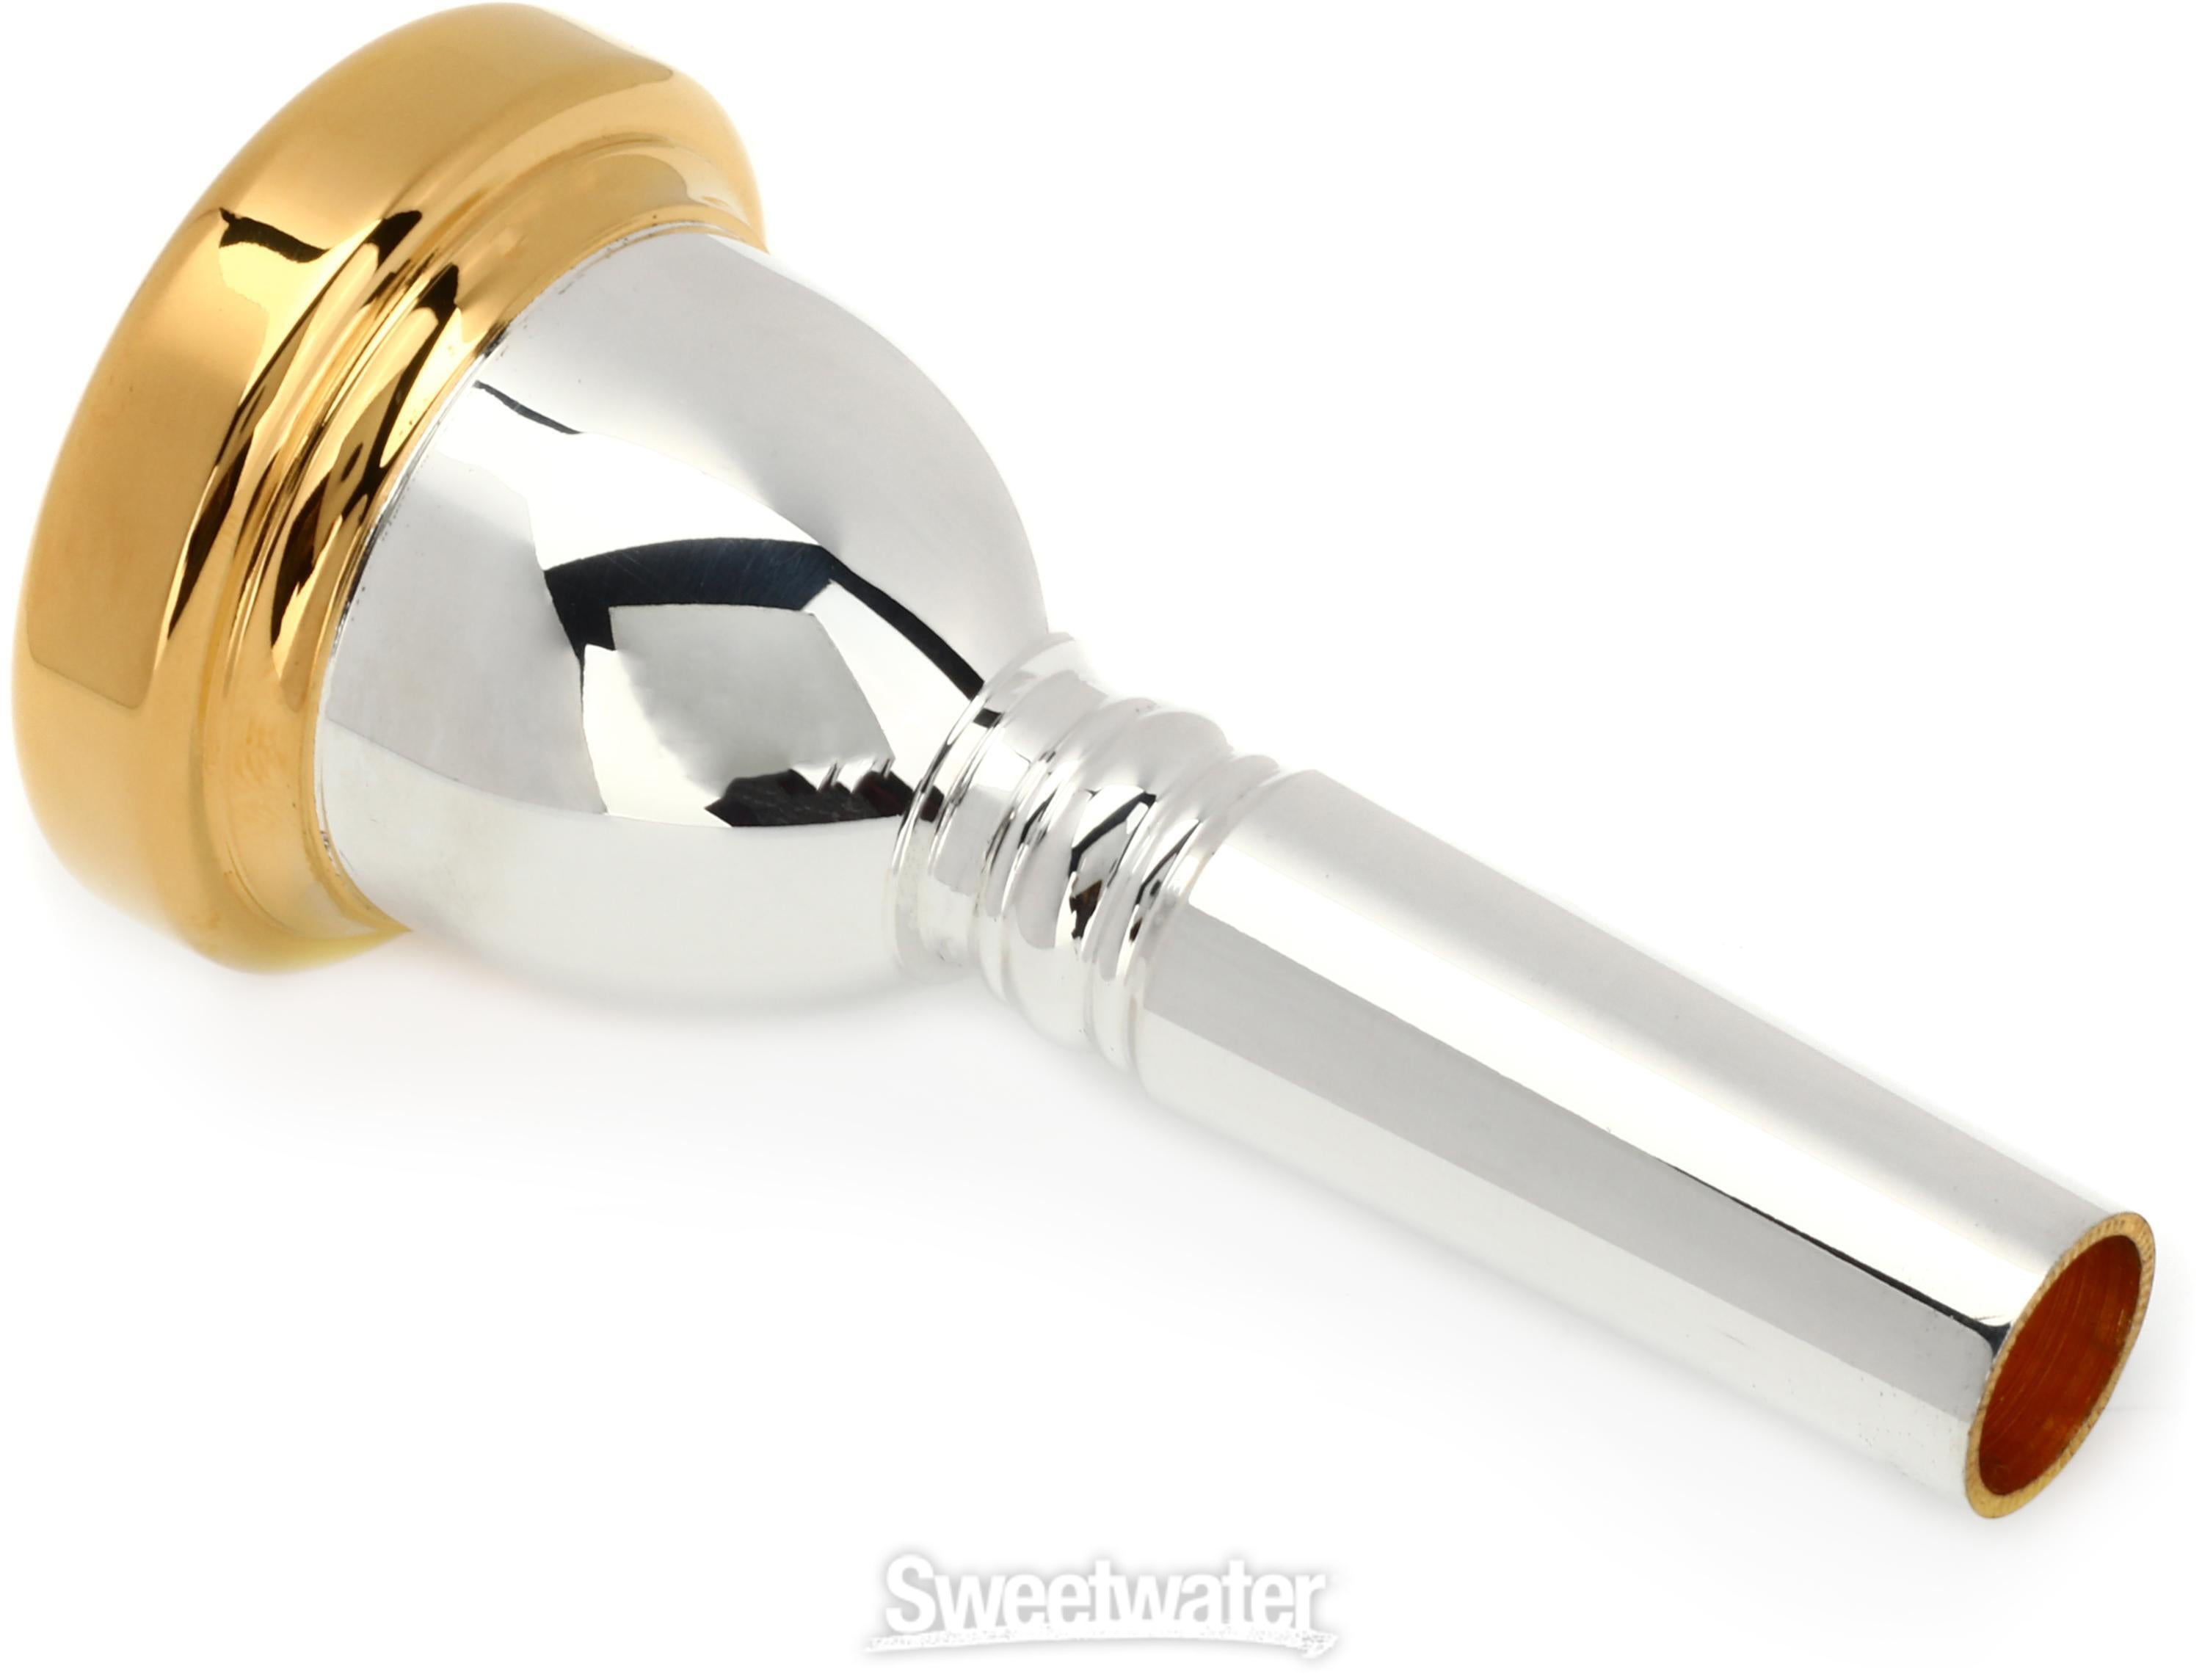 Bach 341 Classic Series Silver-plated Large Shank Trombone Mouthpiece with  Gold-plated Rim - 5G